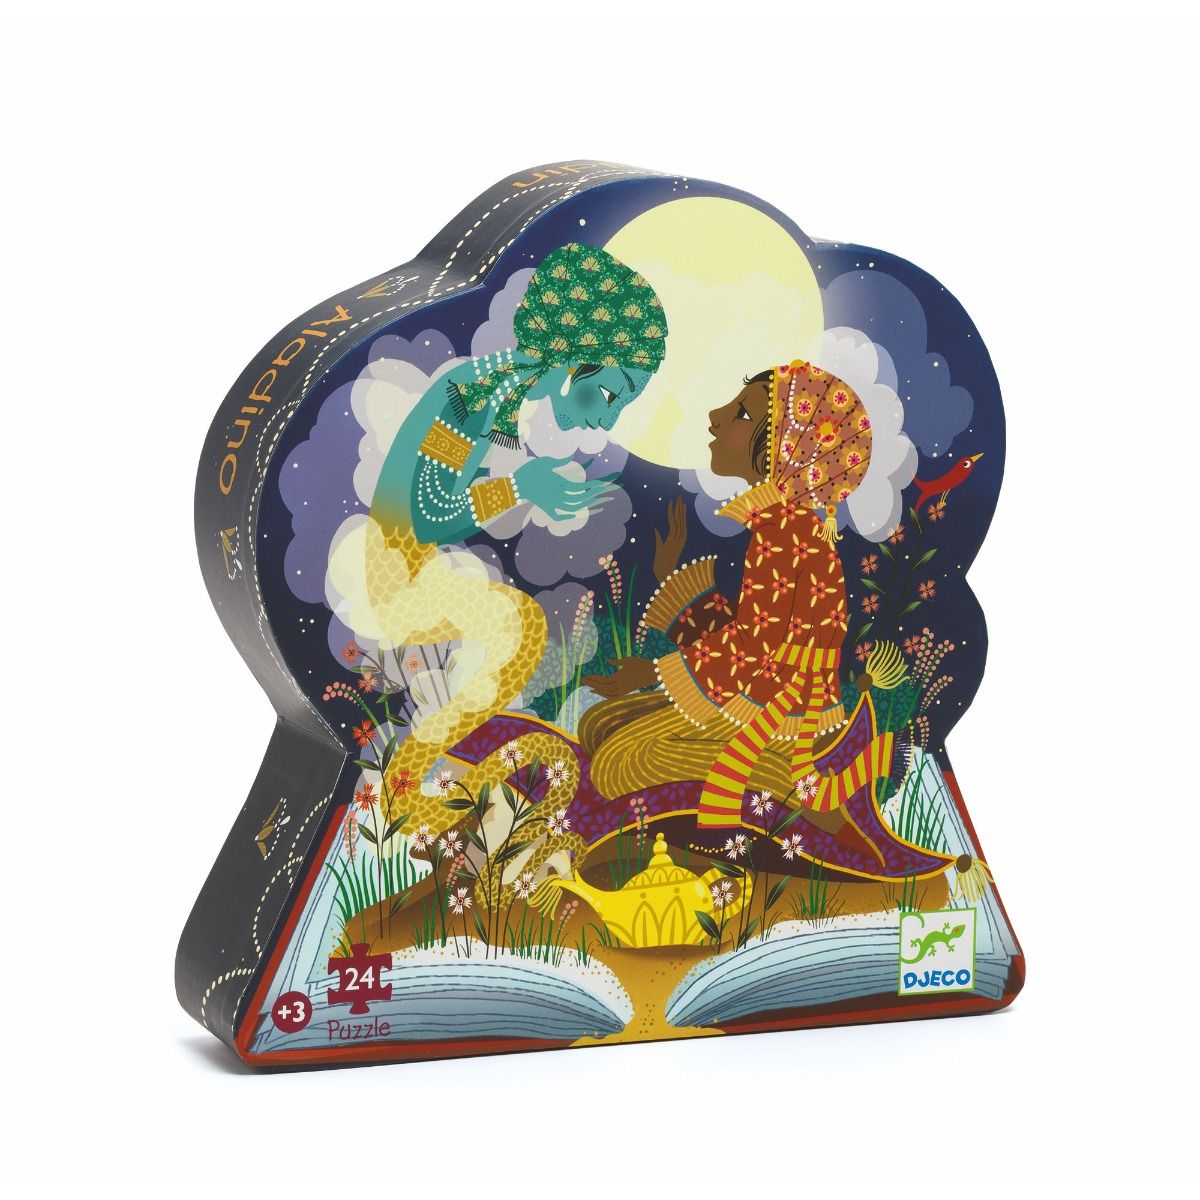 Toys And Games - Puzzles - Silhouette Puzzles Aladdin